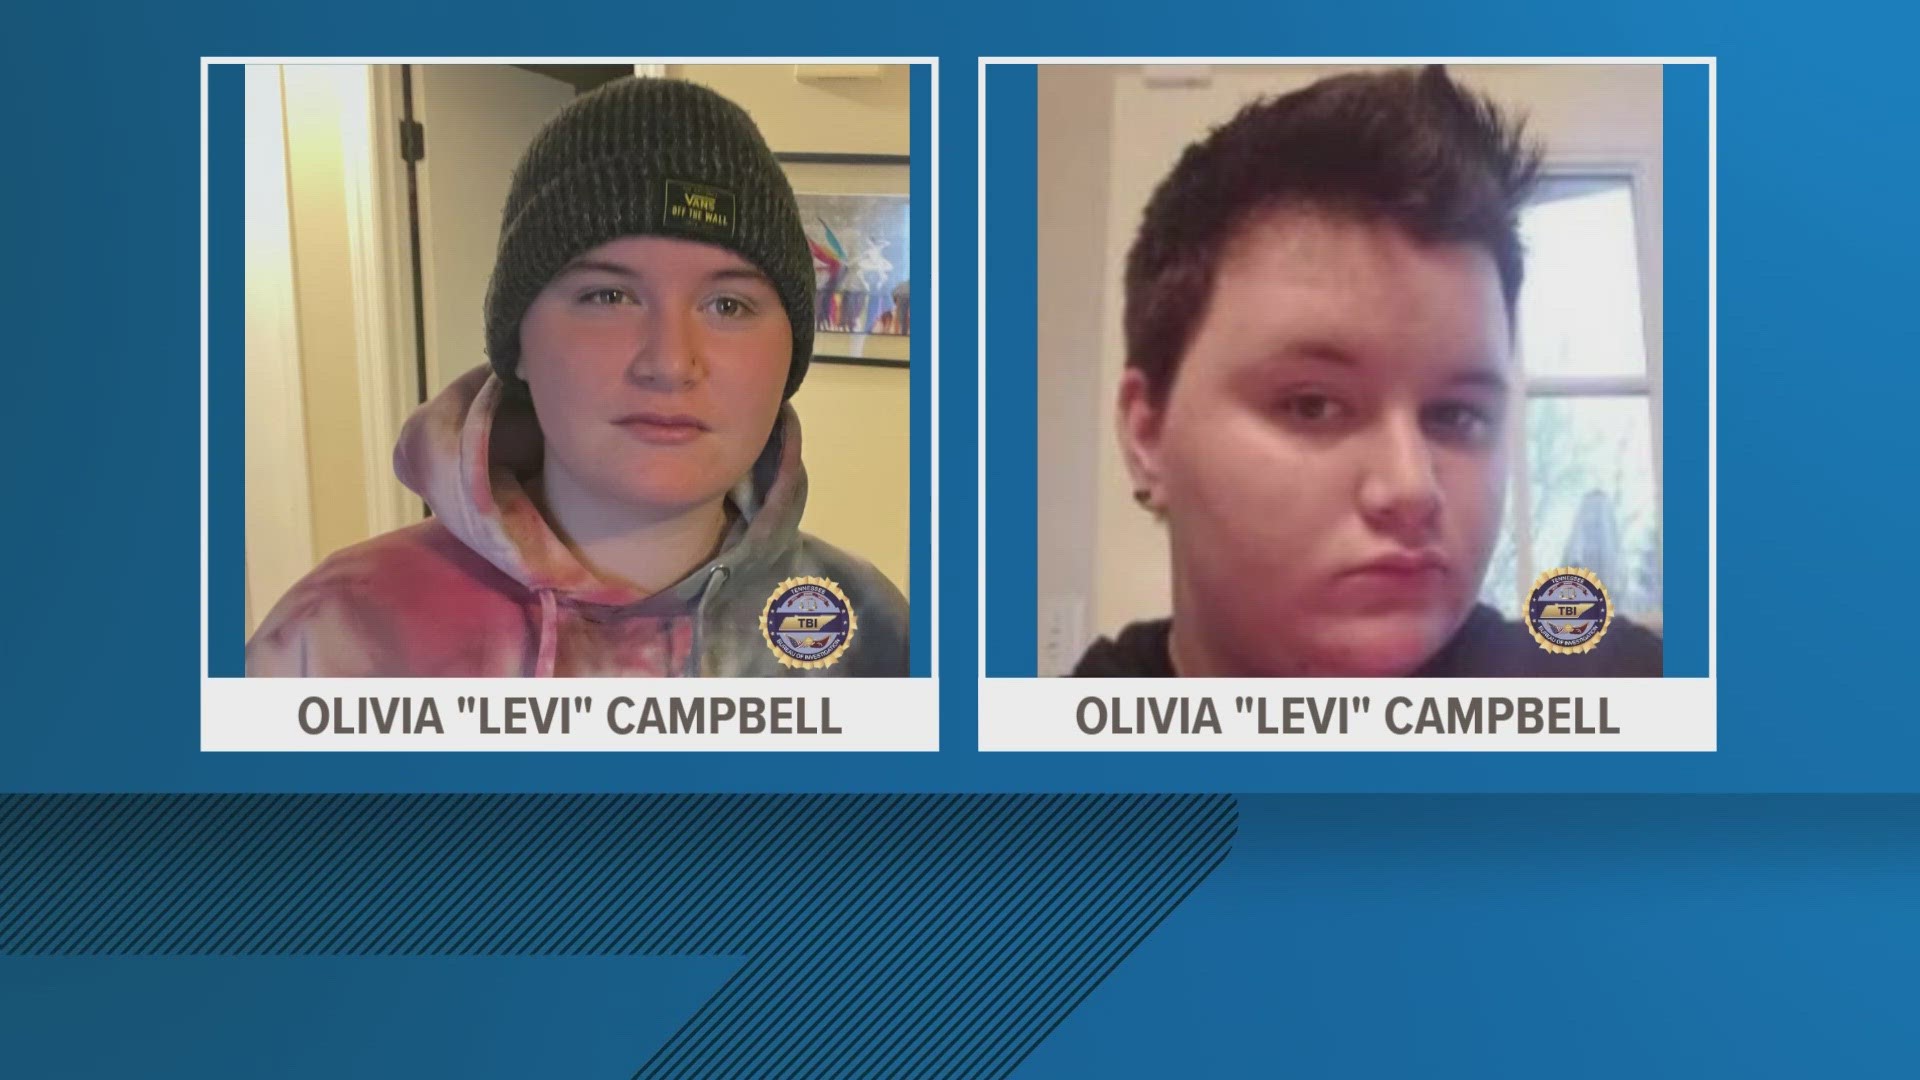 Olivia "Levi" Campbell was found on April 22 in Tyson Park after a tip was submitted, the Knoxville Police Department said.